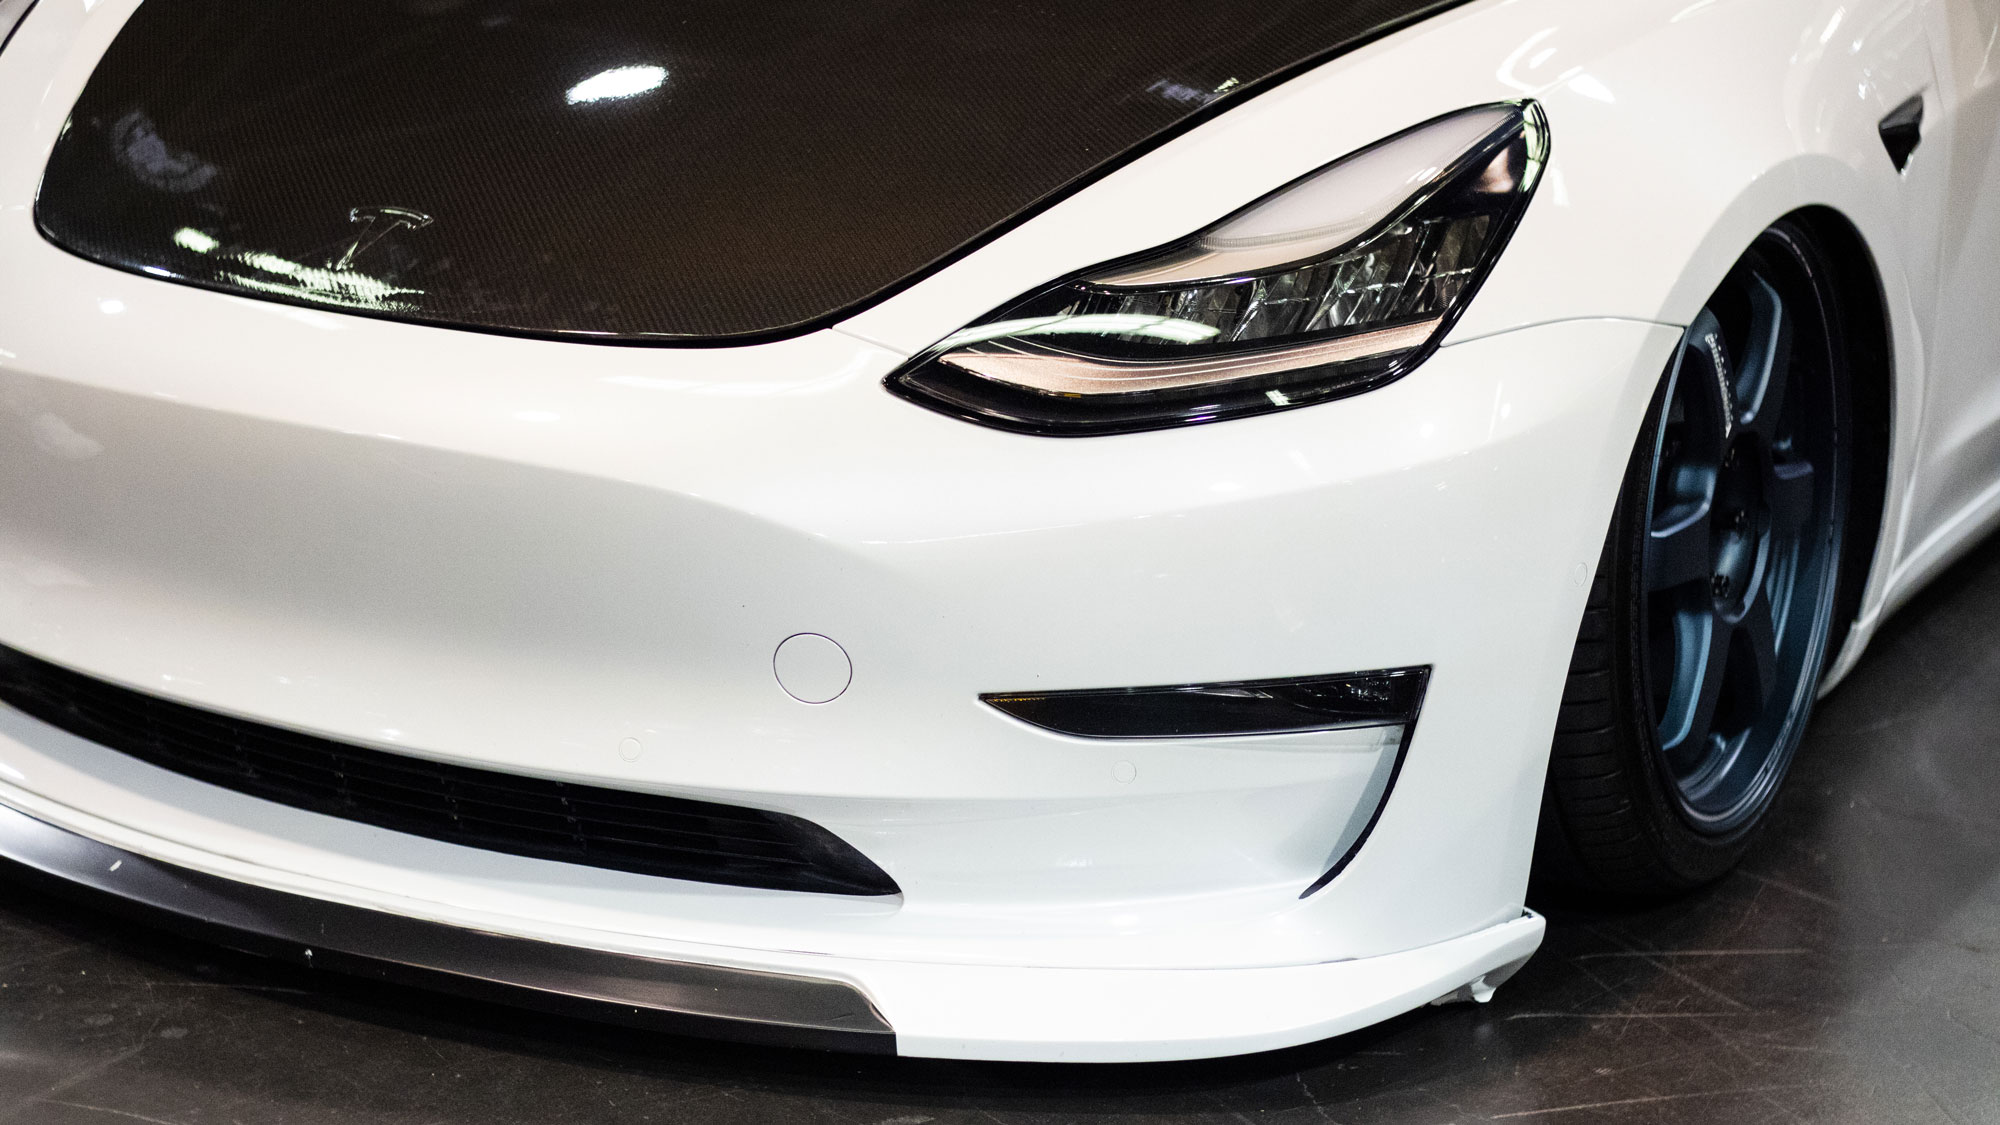 Photo of the front left side of a modified slammed/lowered white Tesla with a carbon fiber hood at SPOCOM Anaheim 2019.